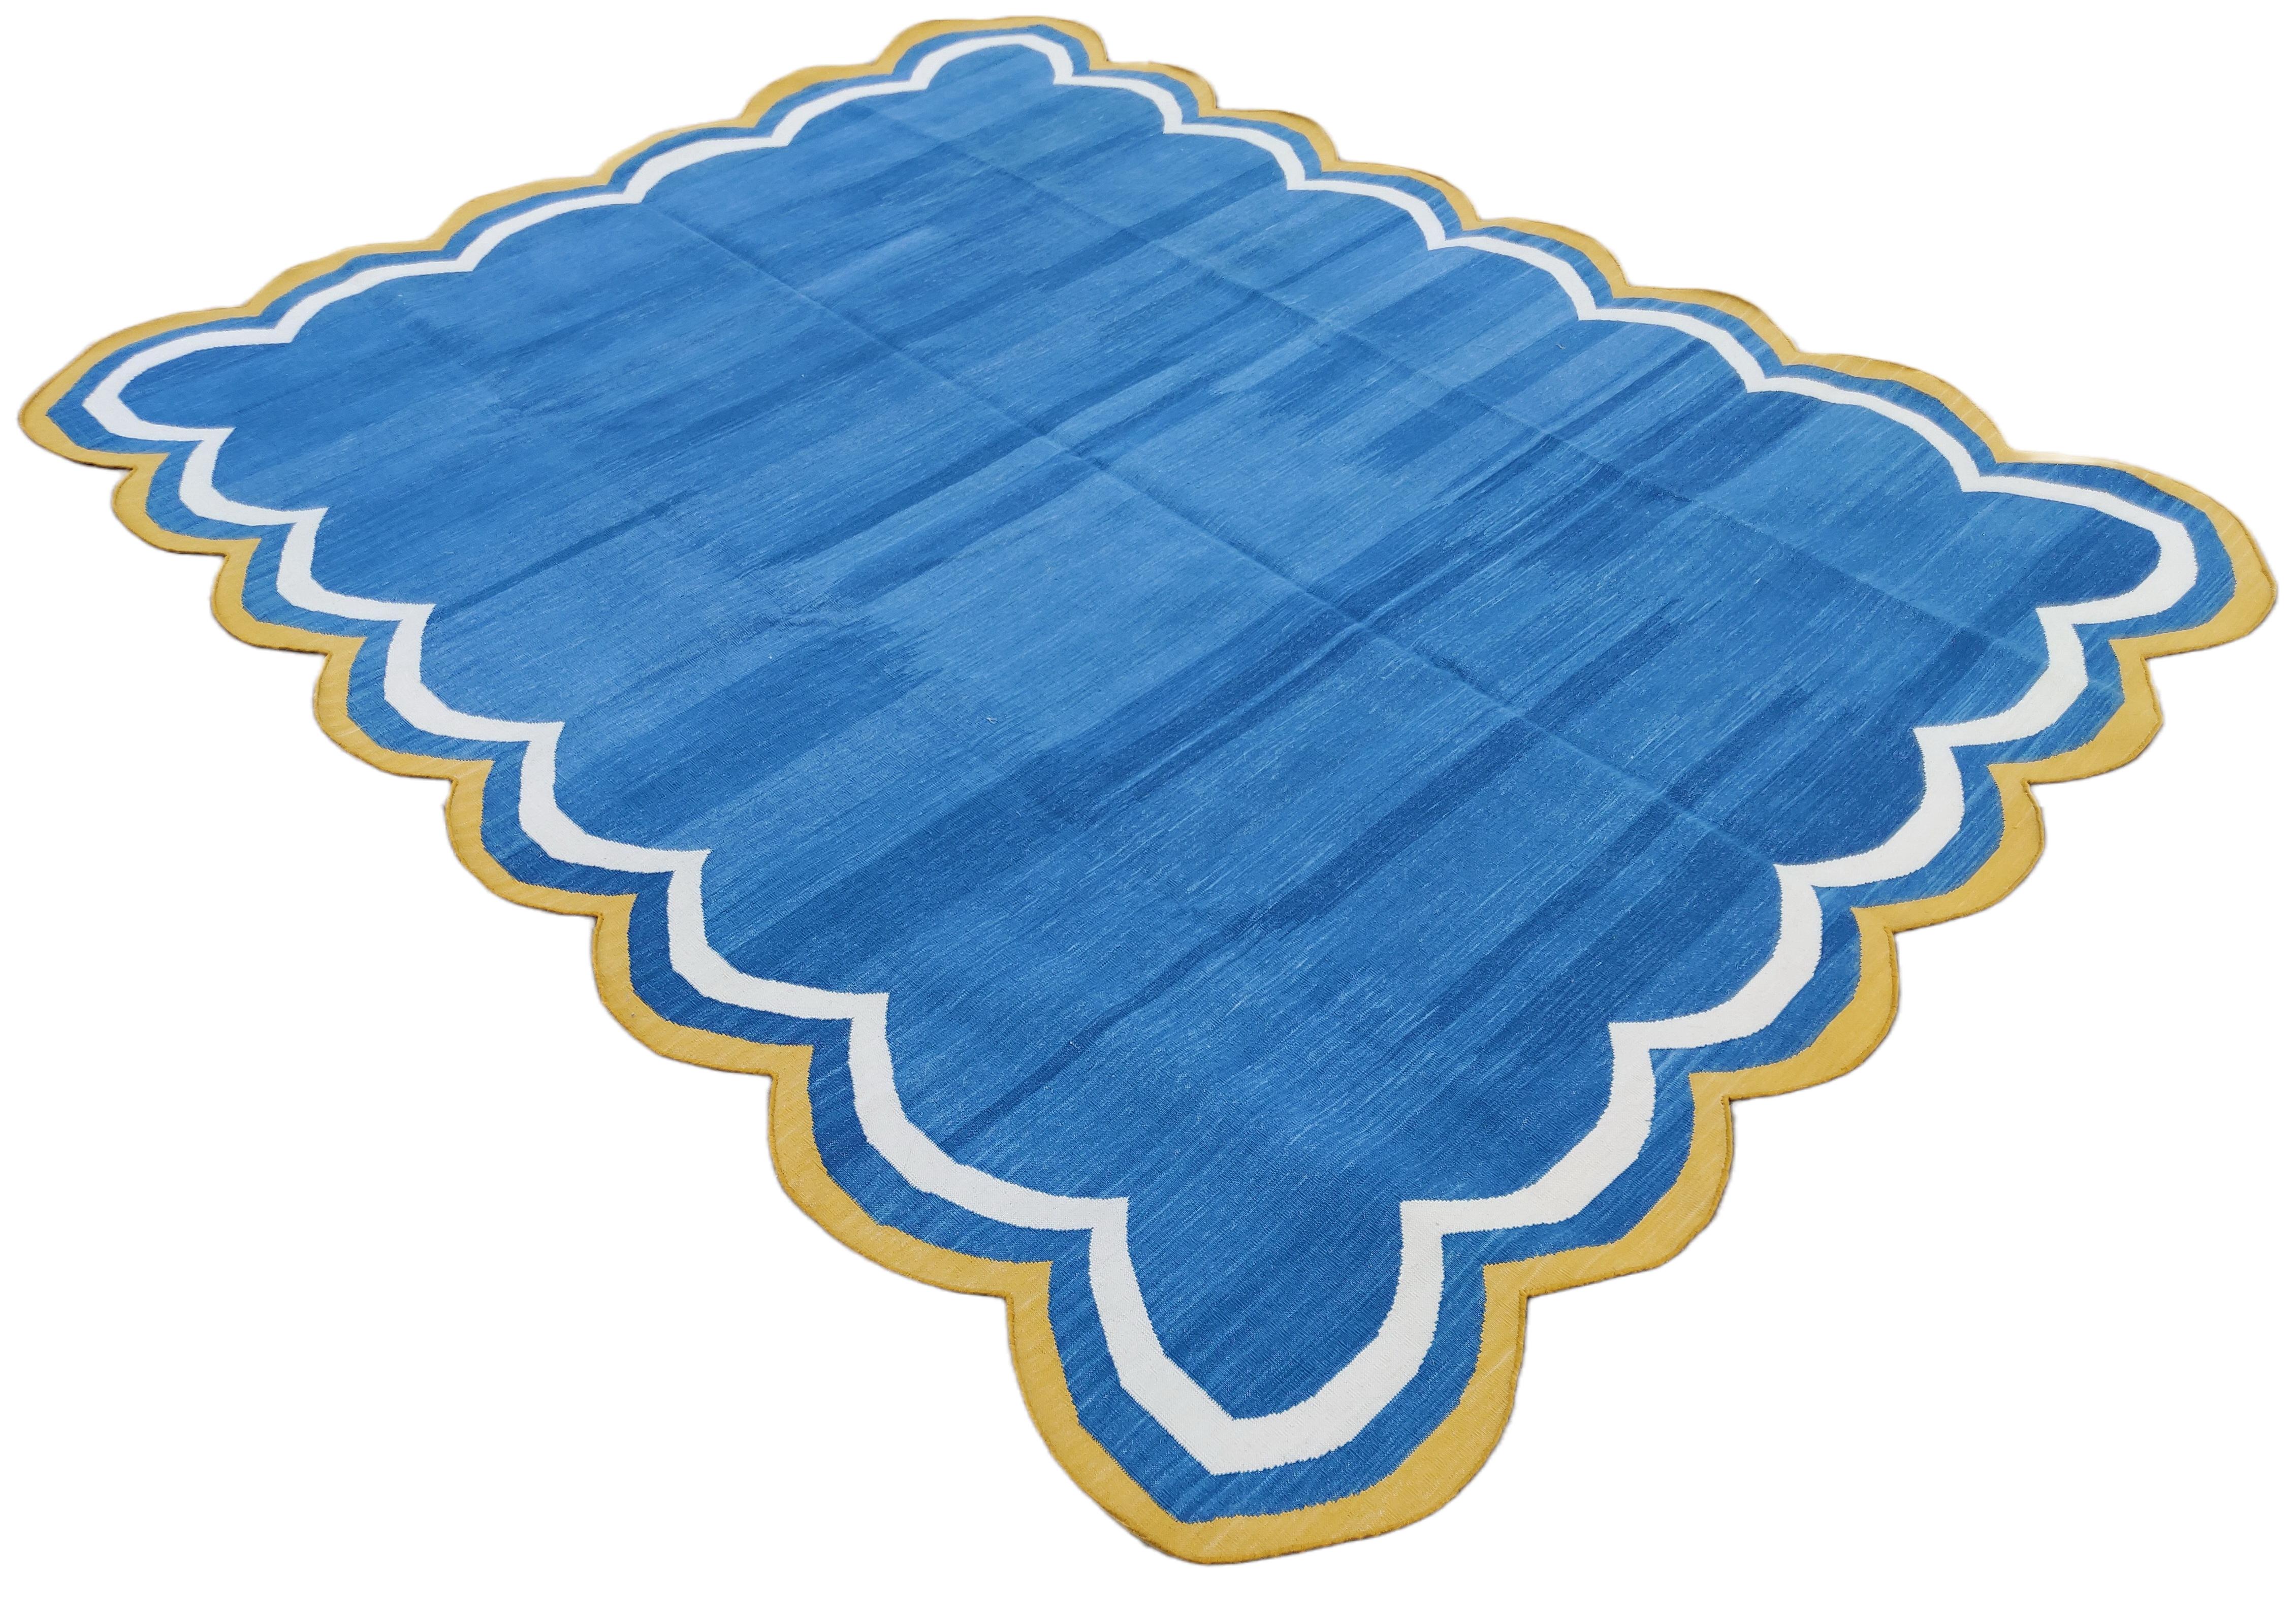 Cotton Vegetable Dyed Indigo Blue, Cream And Yellow Four Sided Scalloped Rug-8'x10' 
(Scallops runs all four Sides)
These special flat-weave dhurries are hand-woven with 15 ply 100% cotton yarn. Due to the special manufacturing techniques used to